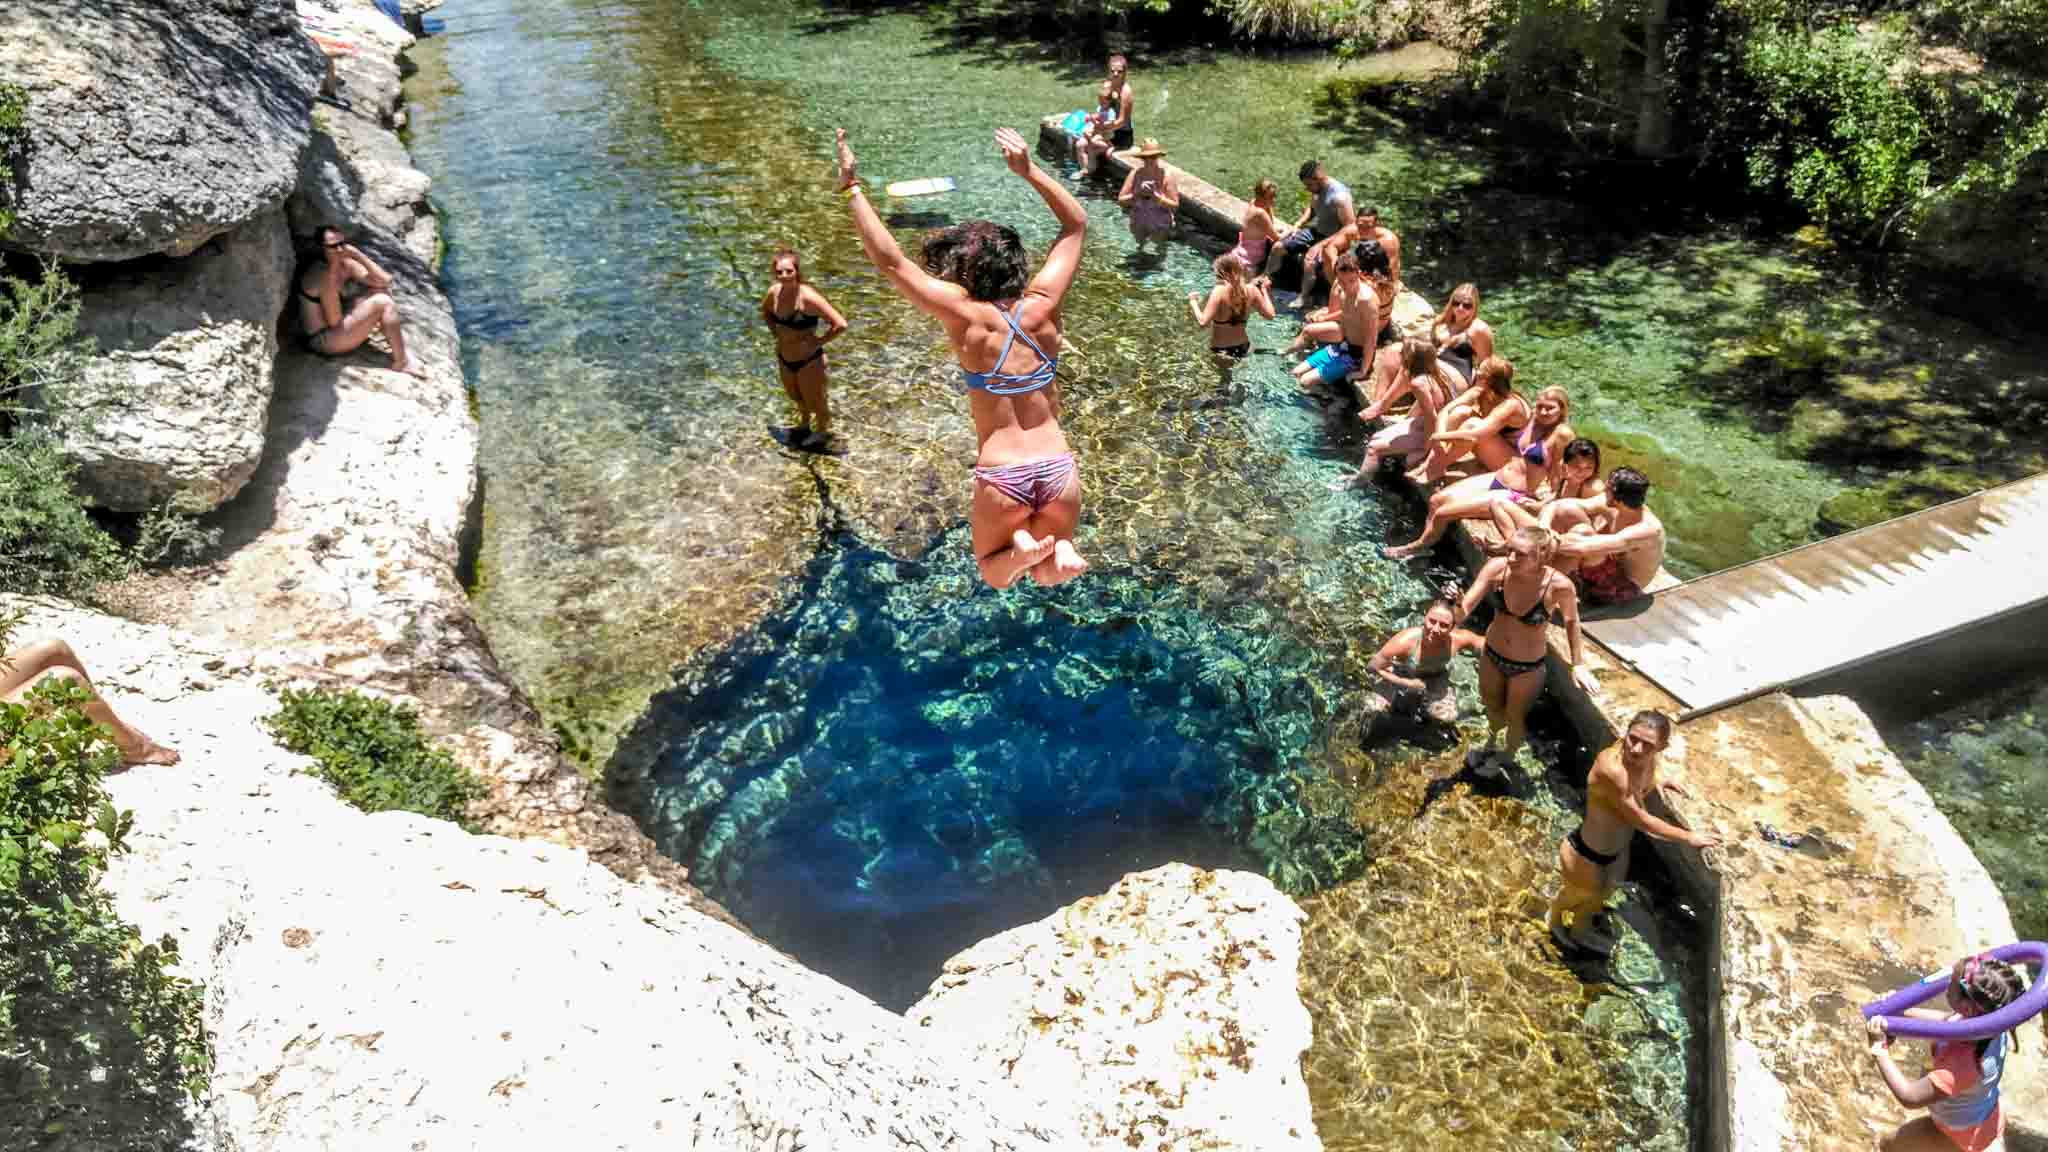 Woman jumping into into deep water with onlookers nearby